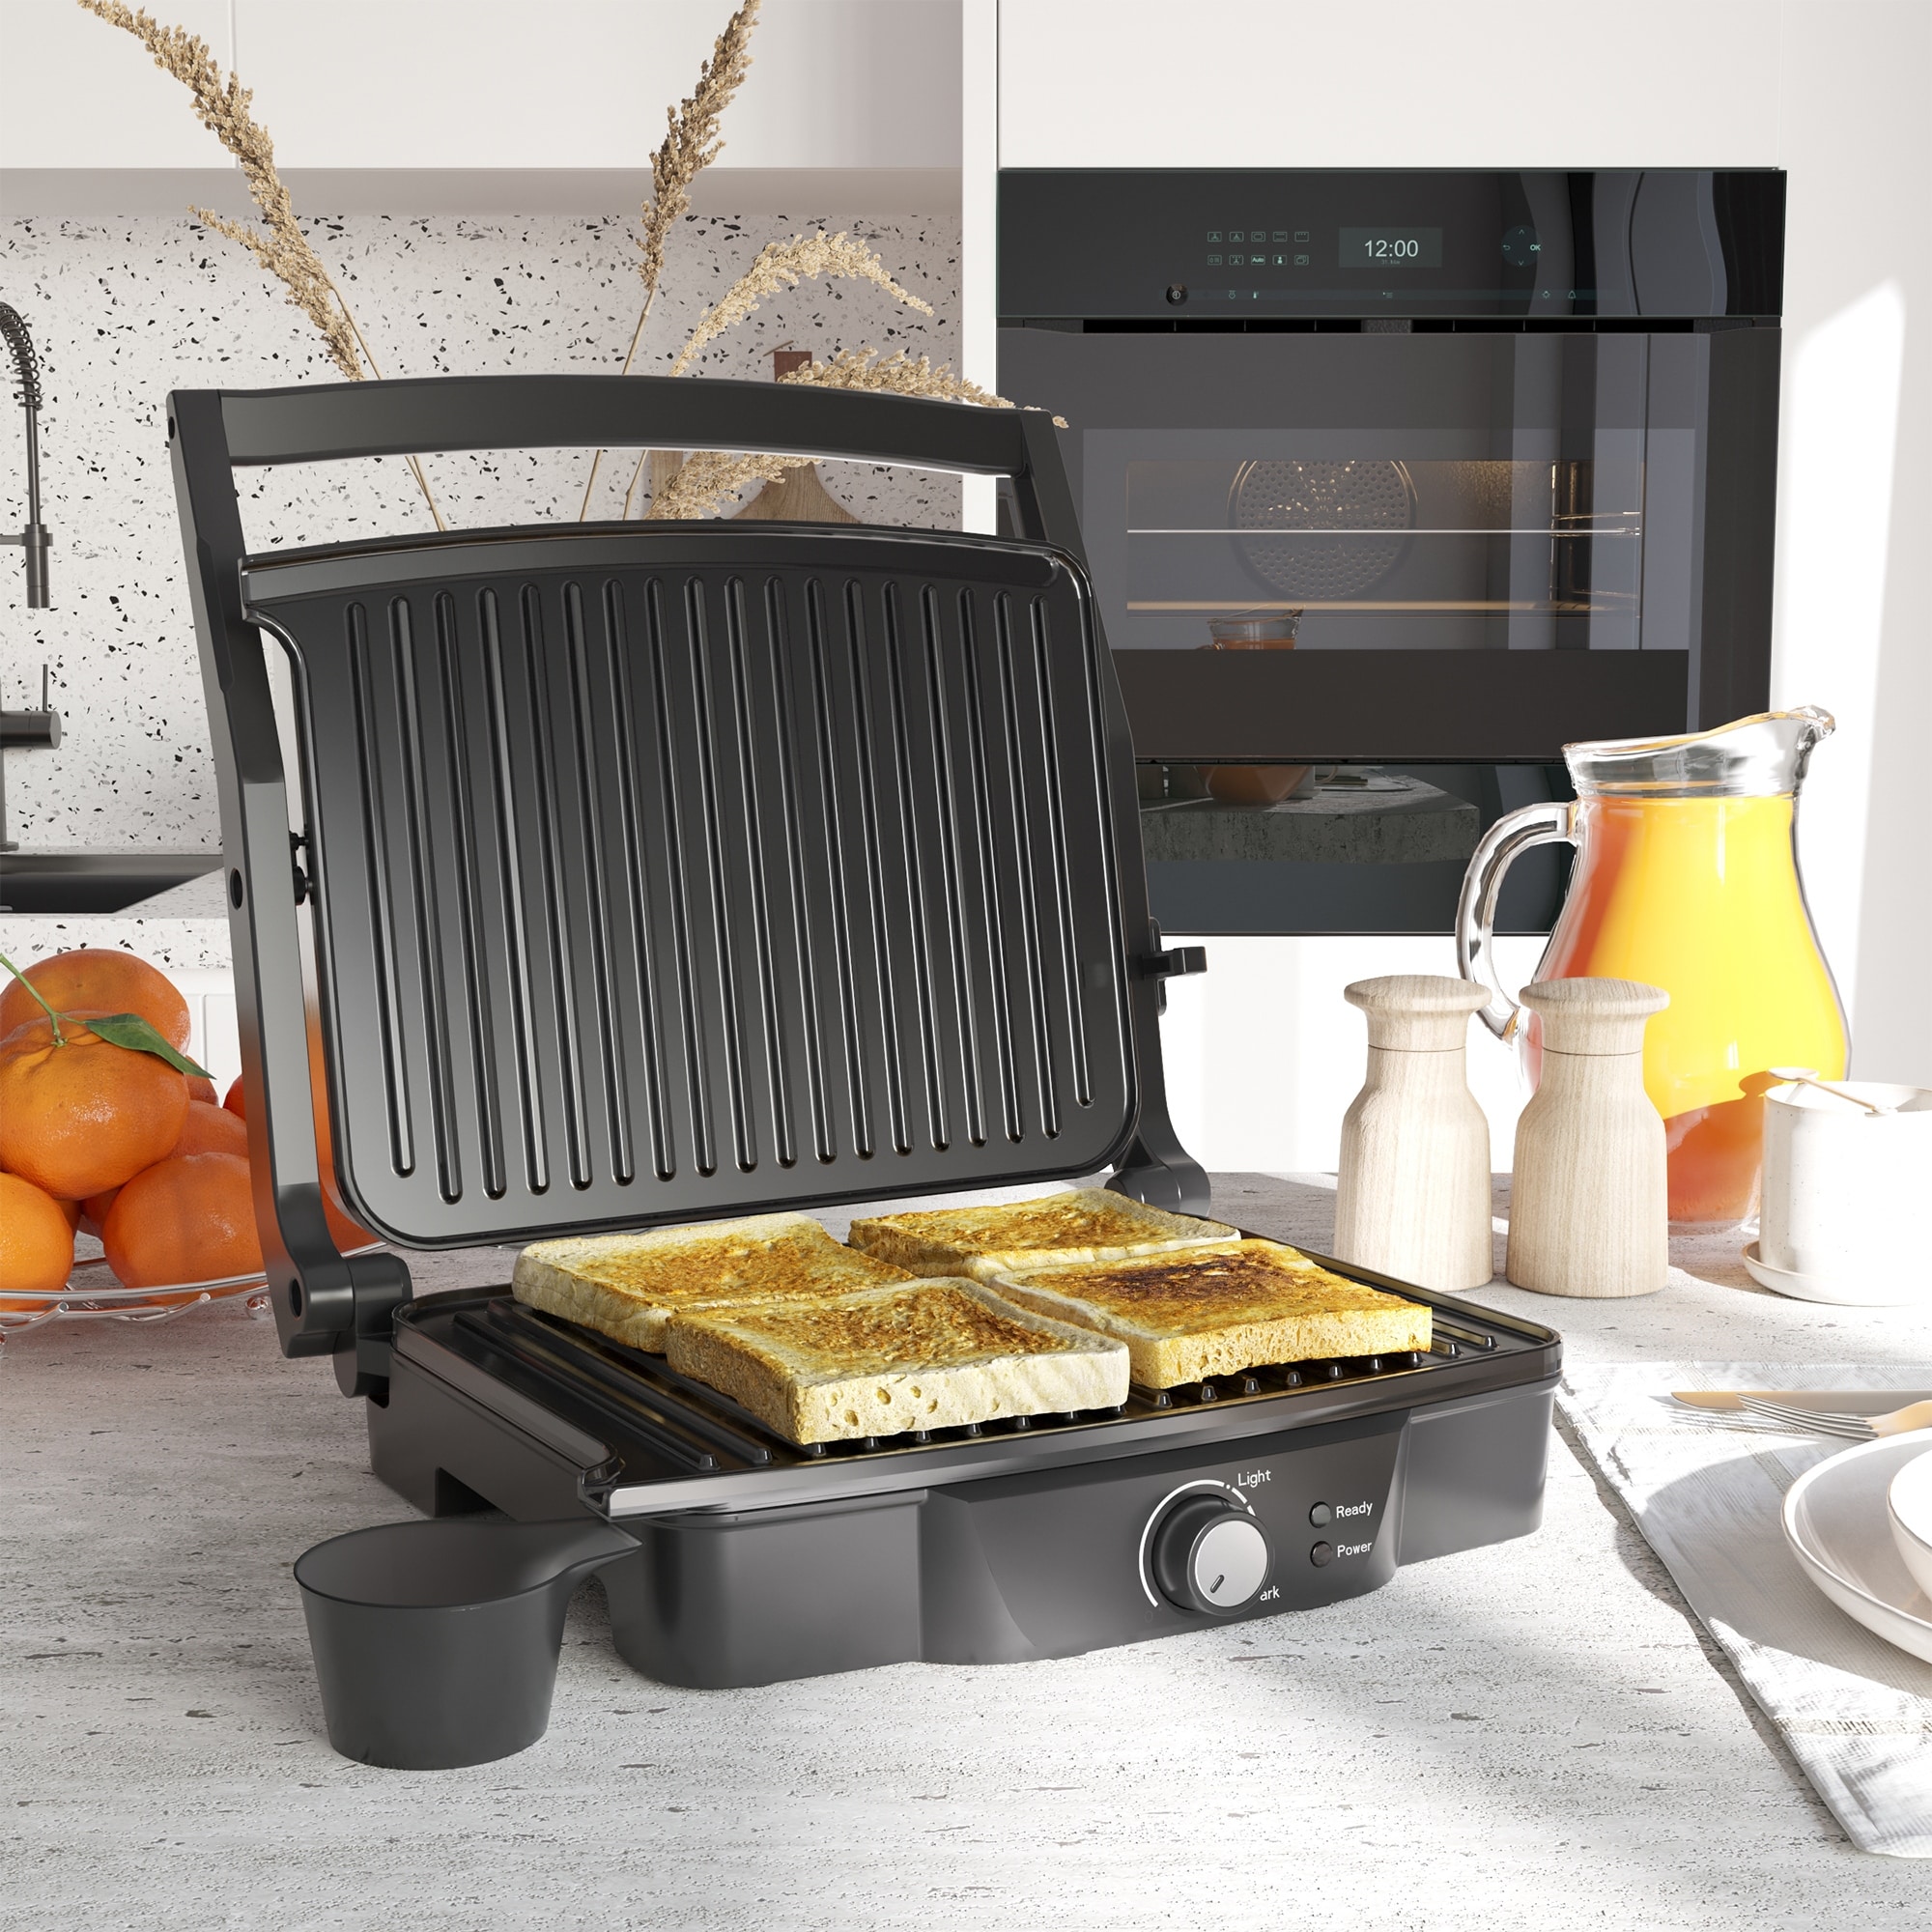 HOMCOM Panini Press Grill, Stainless Steel Countertop Sandwich Maker with Non-Stick